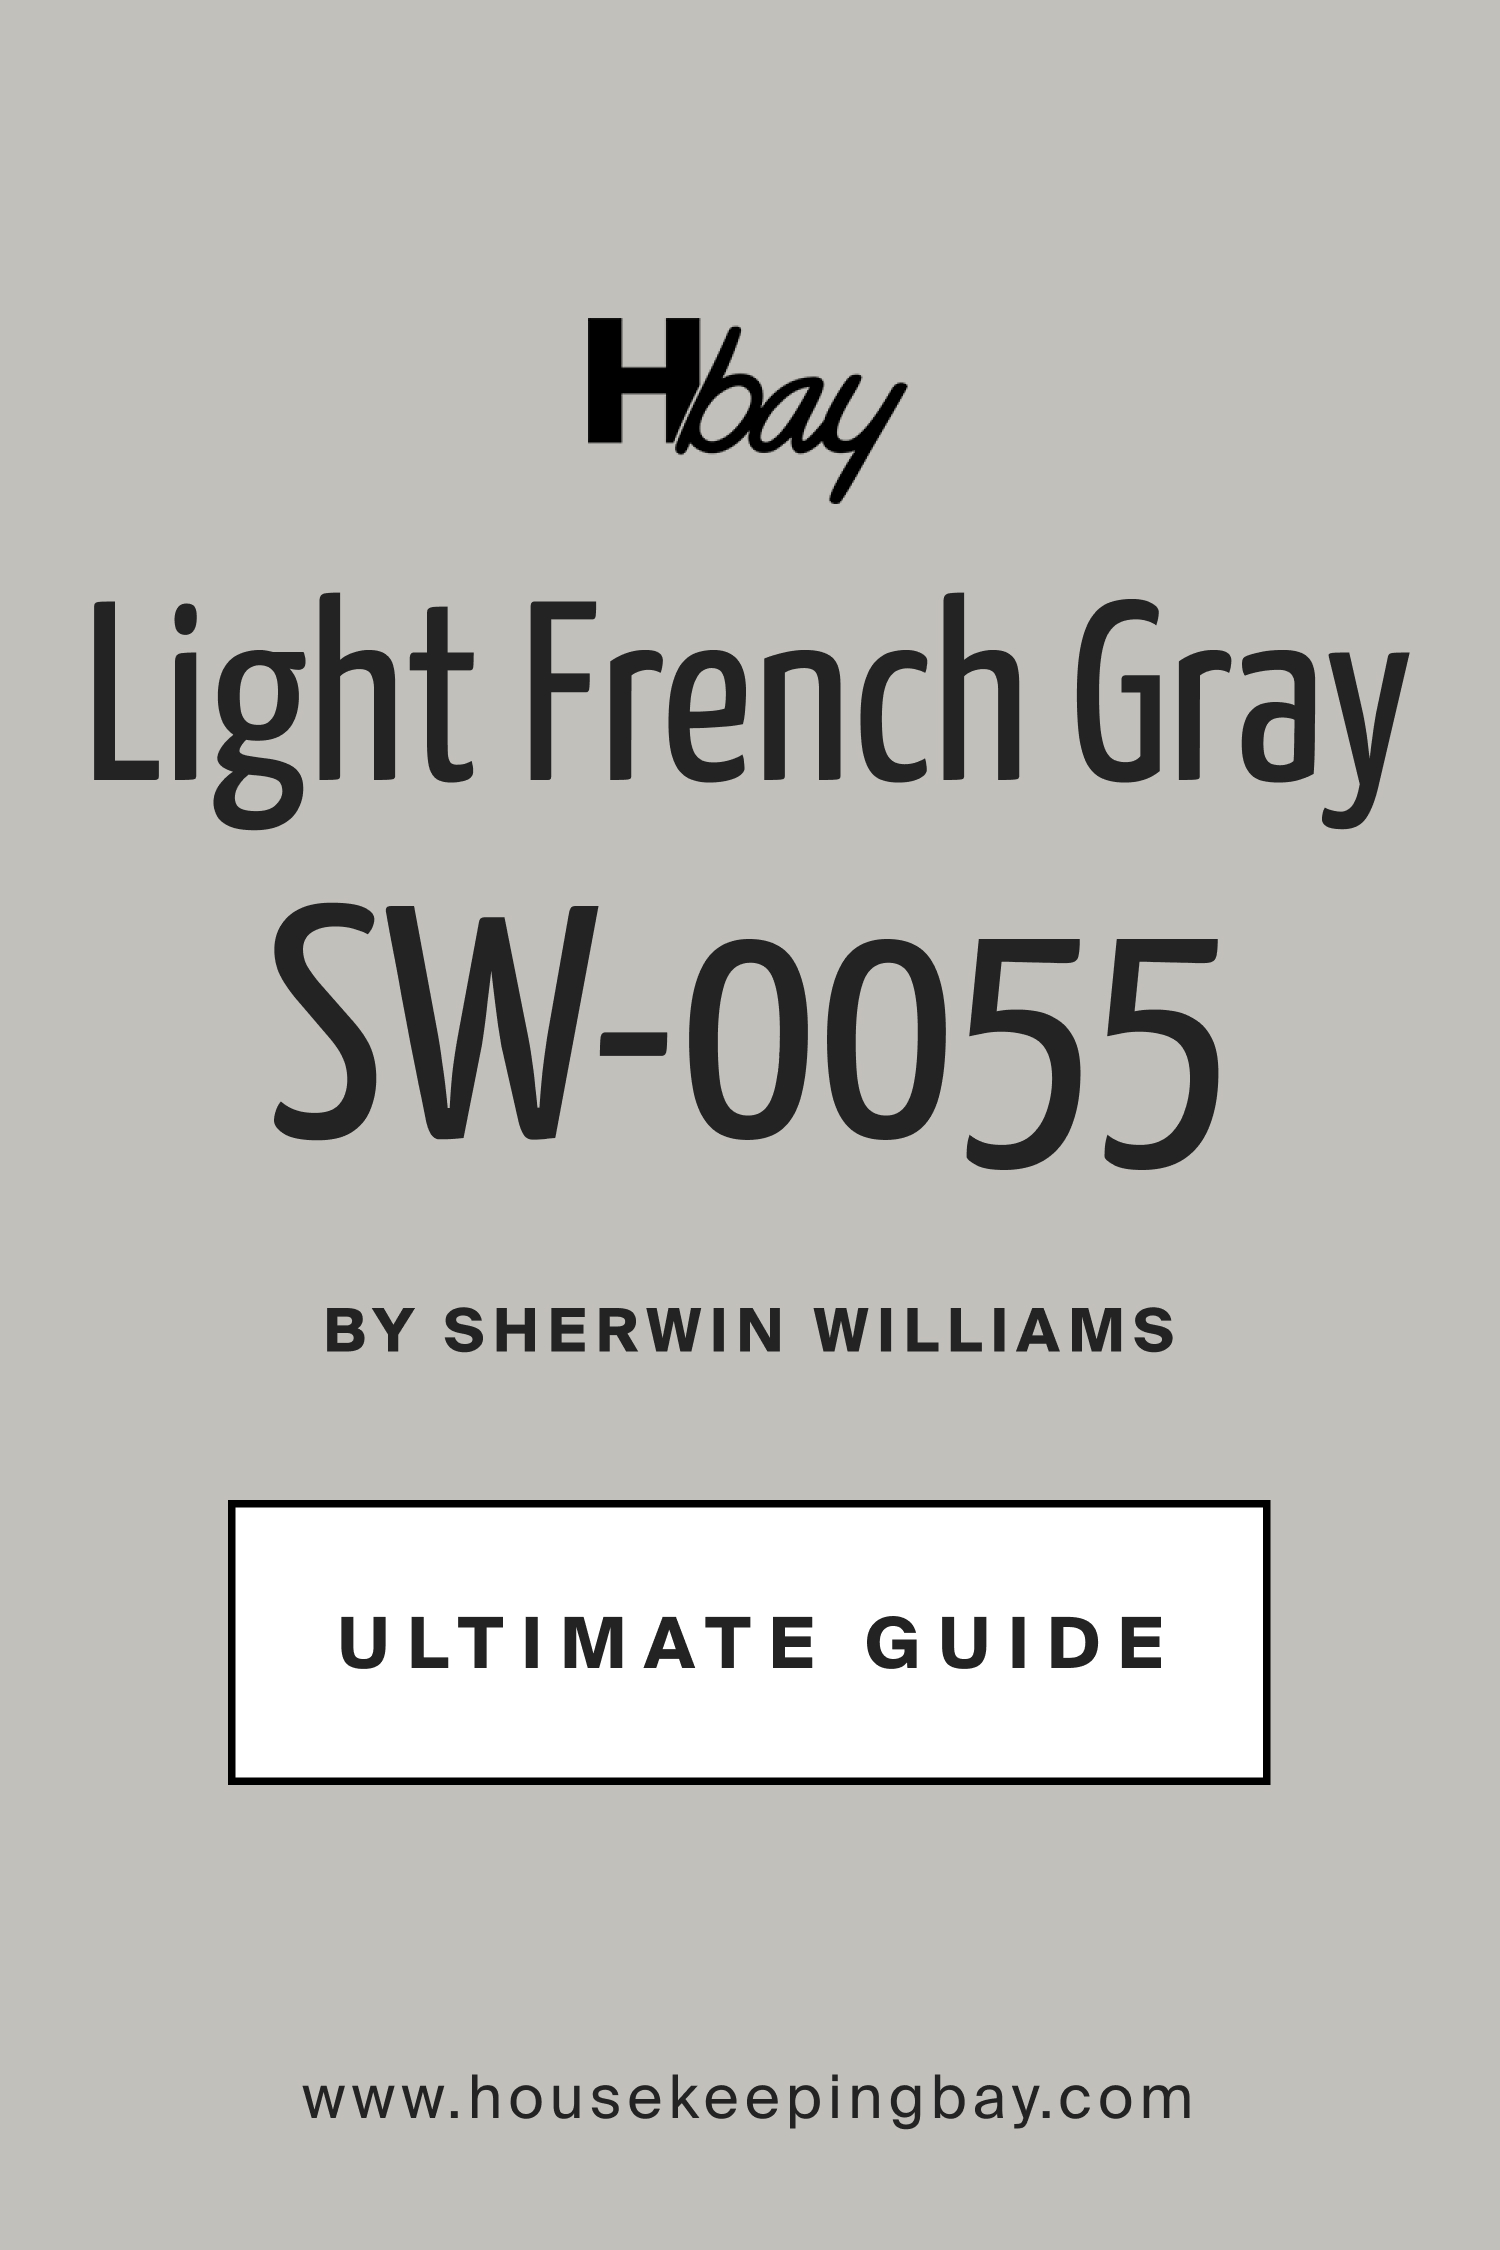 Light French Gray SW 0055 by Sherwin Williams Ultimate Guide